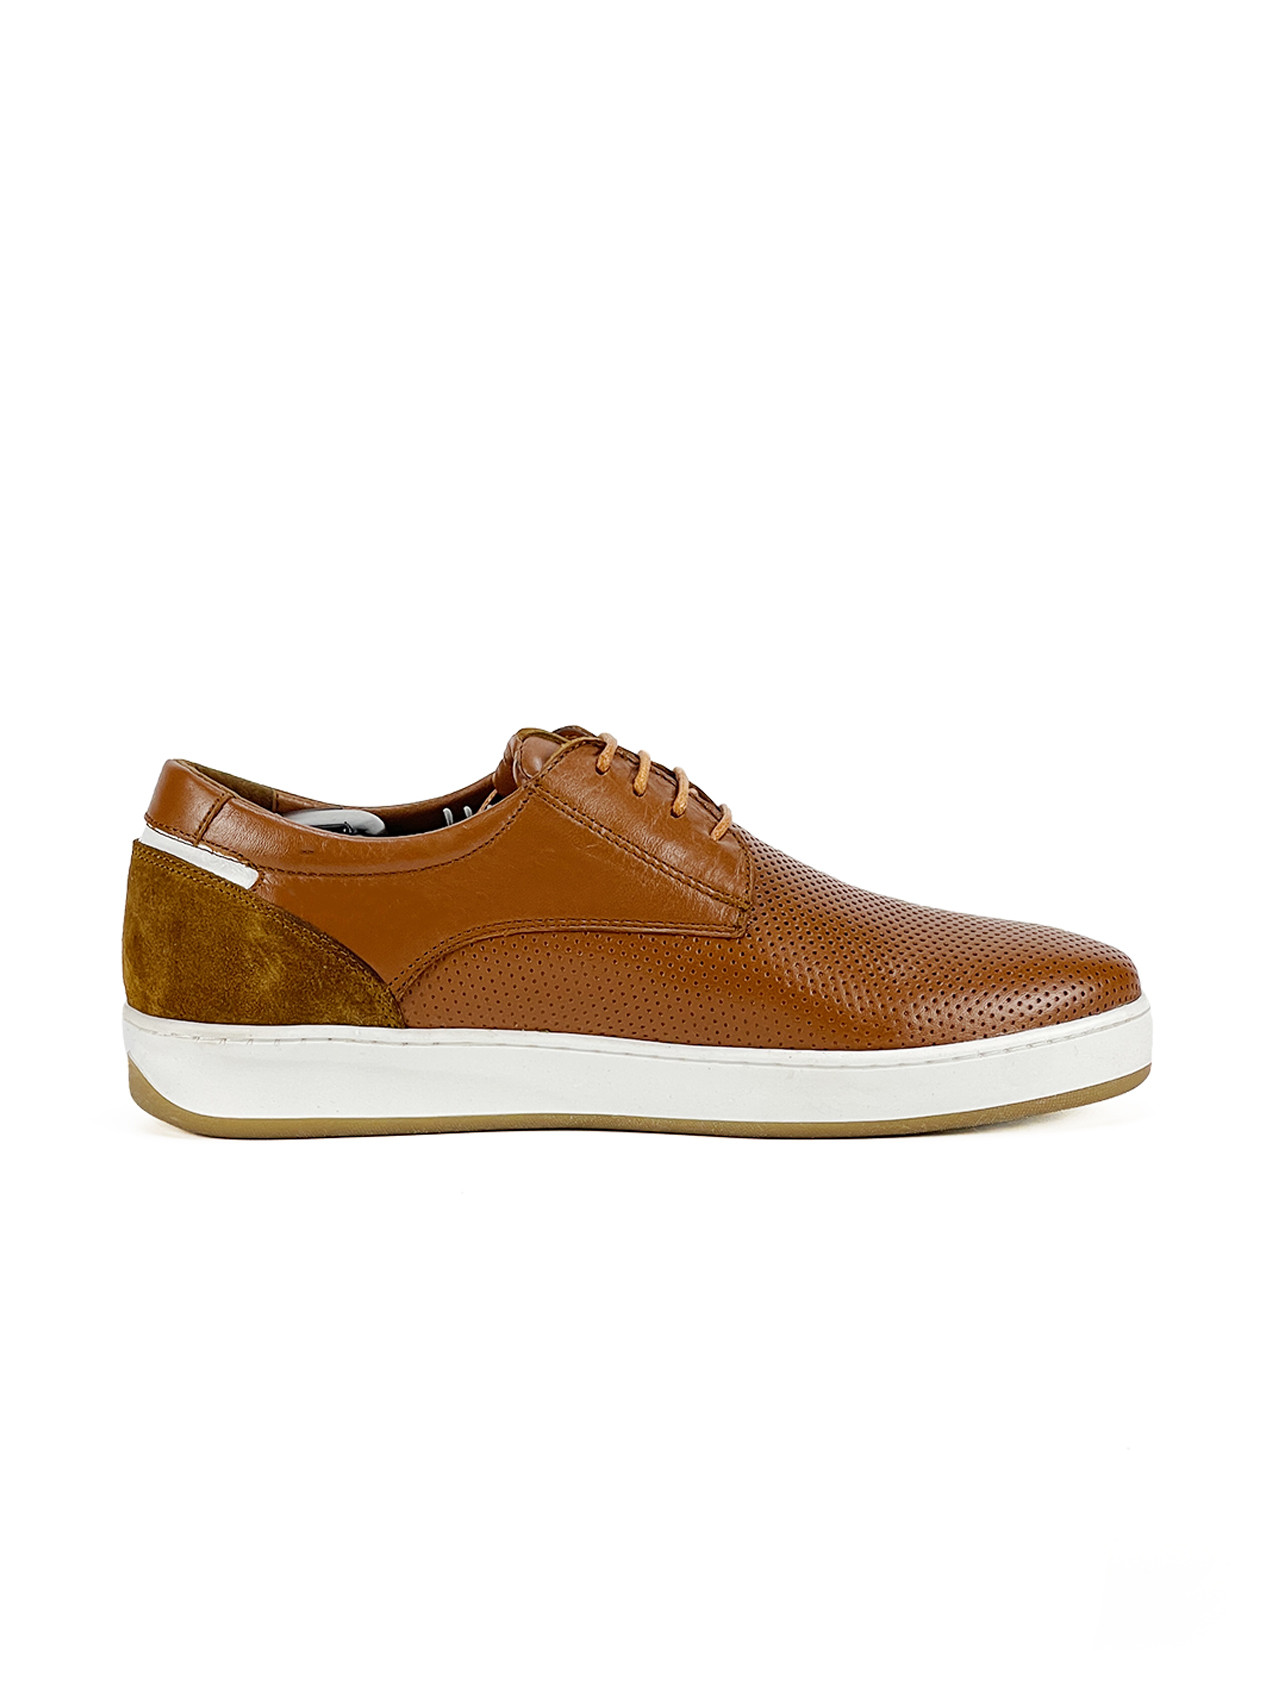 Chaussure hommes Hibiscus, Tabac, 40